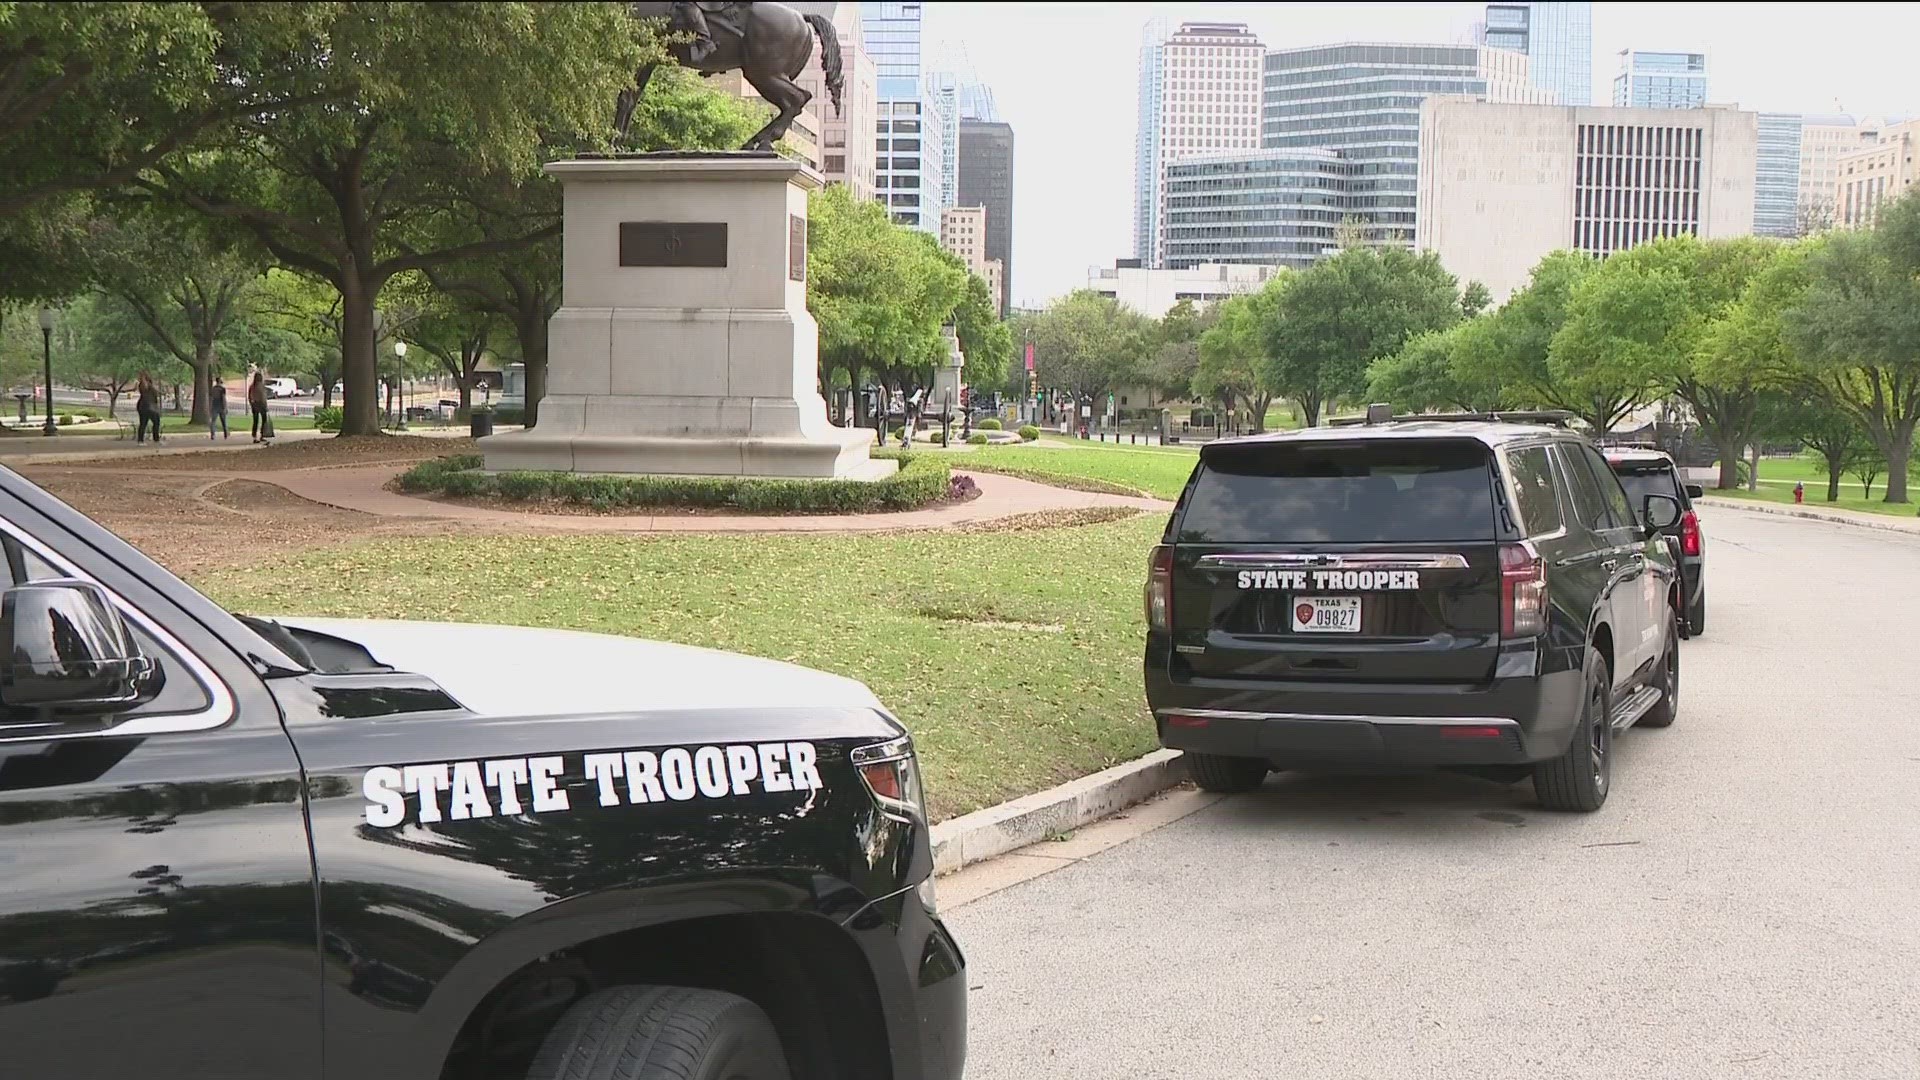 On Thursday, Texas DPS troopers hit Austin streets to help with enforcement as the Austin Police Department's staffing issues continue.